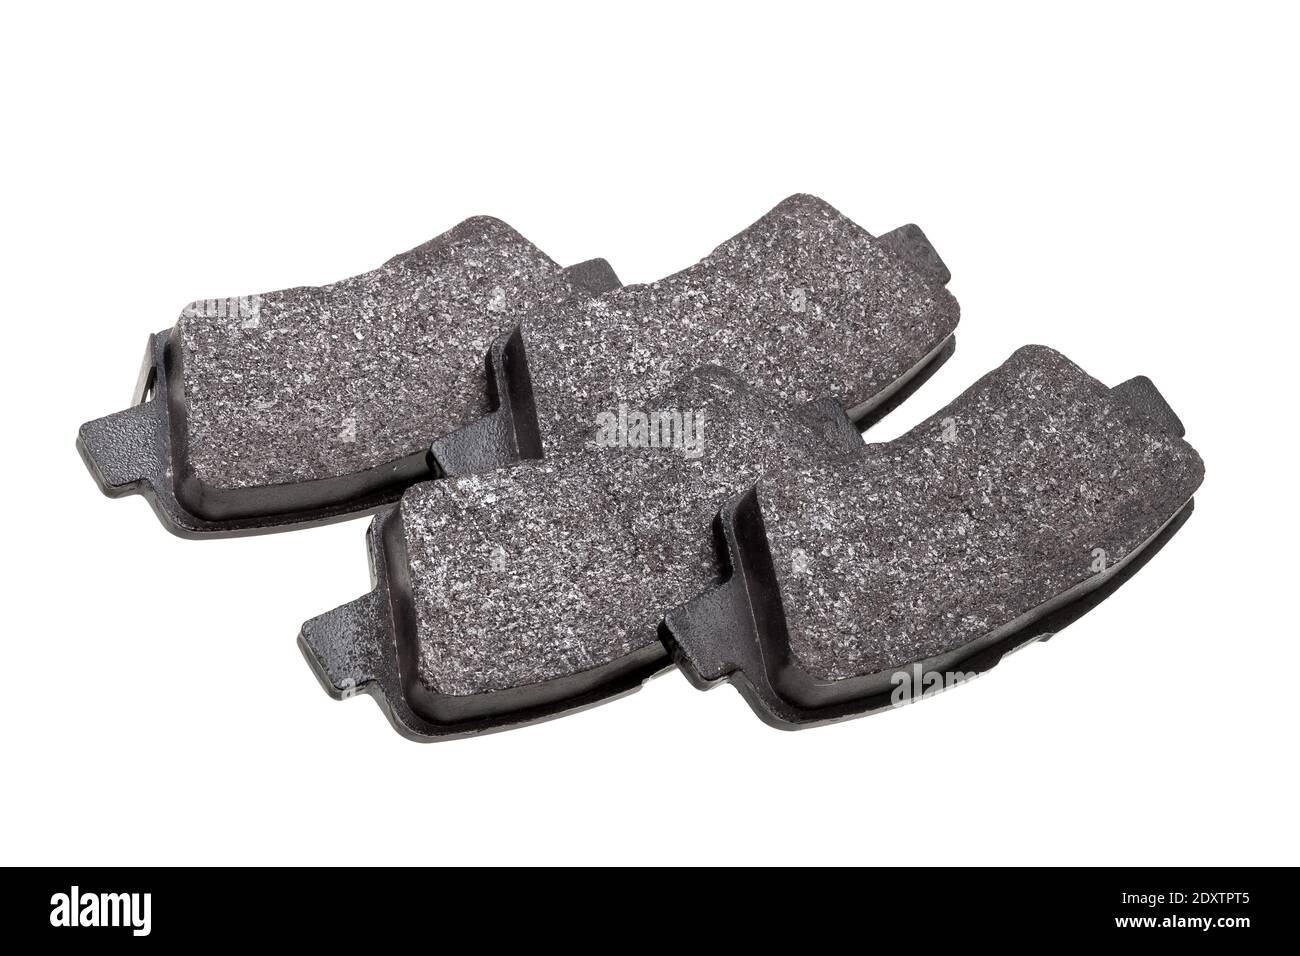 set of brake pads car spare parts, vehicle brakes system objects isolated on white background, nobody. Stock Photo